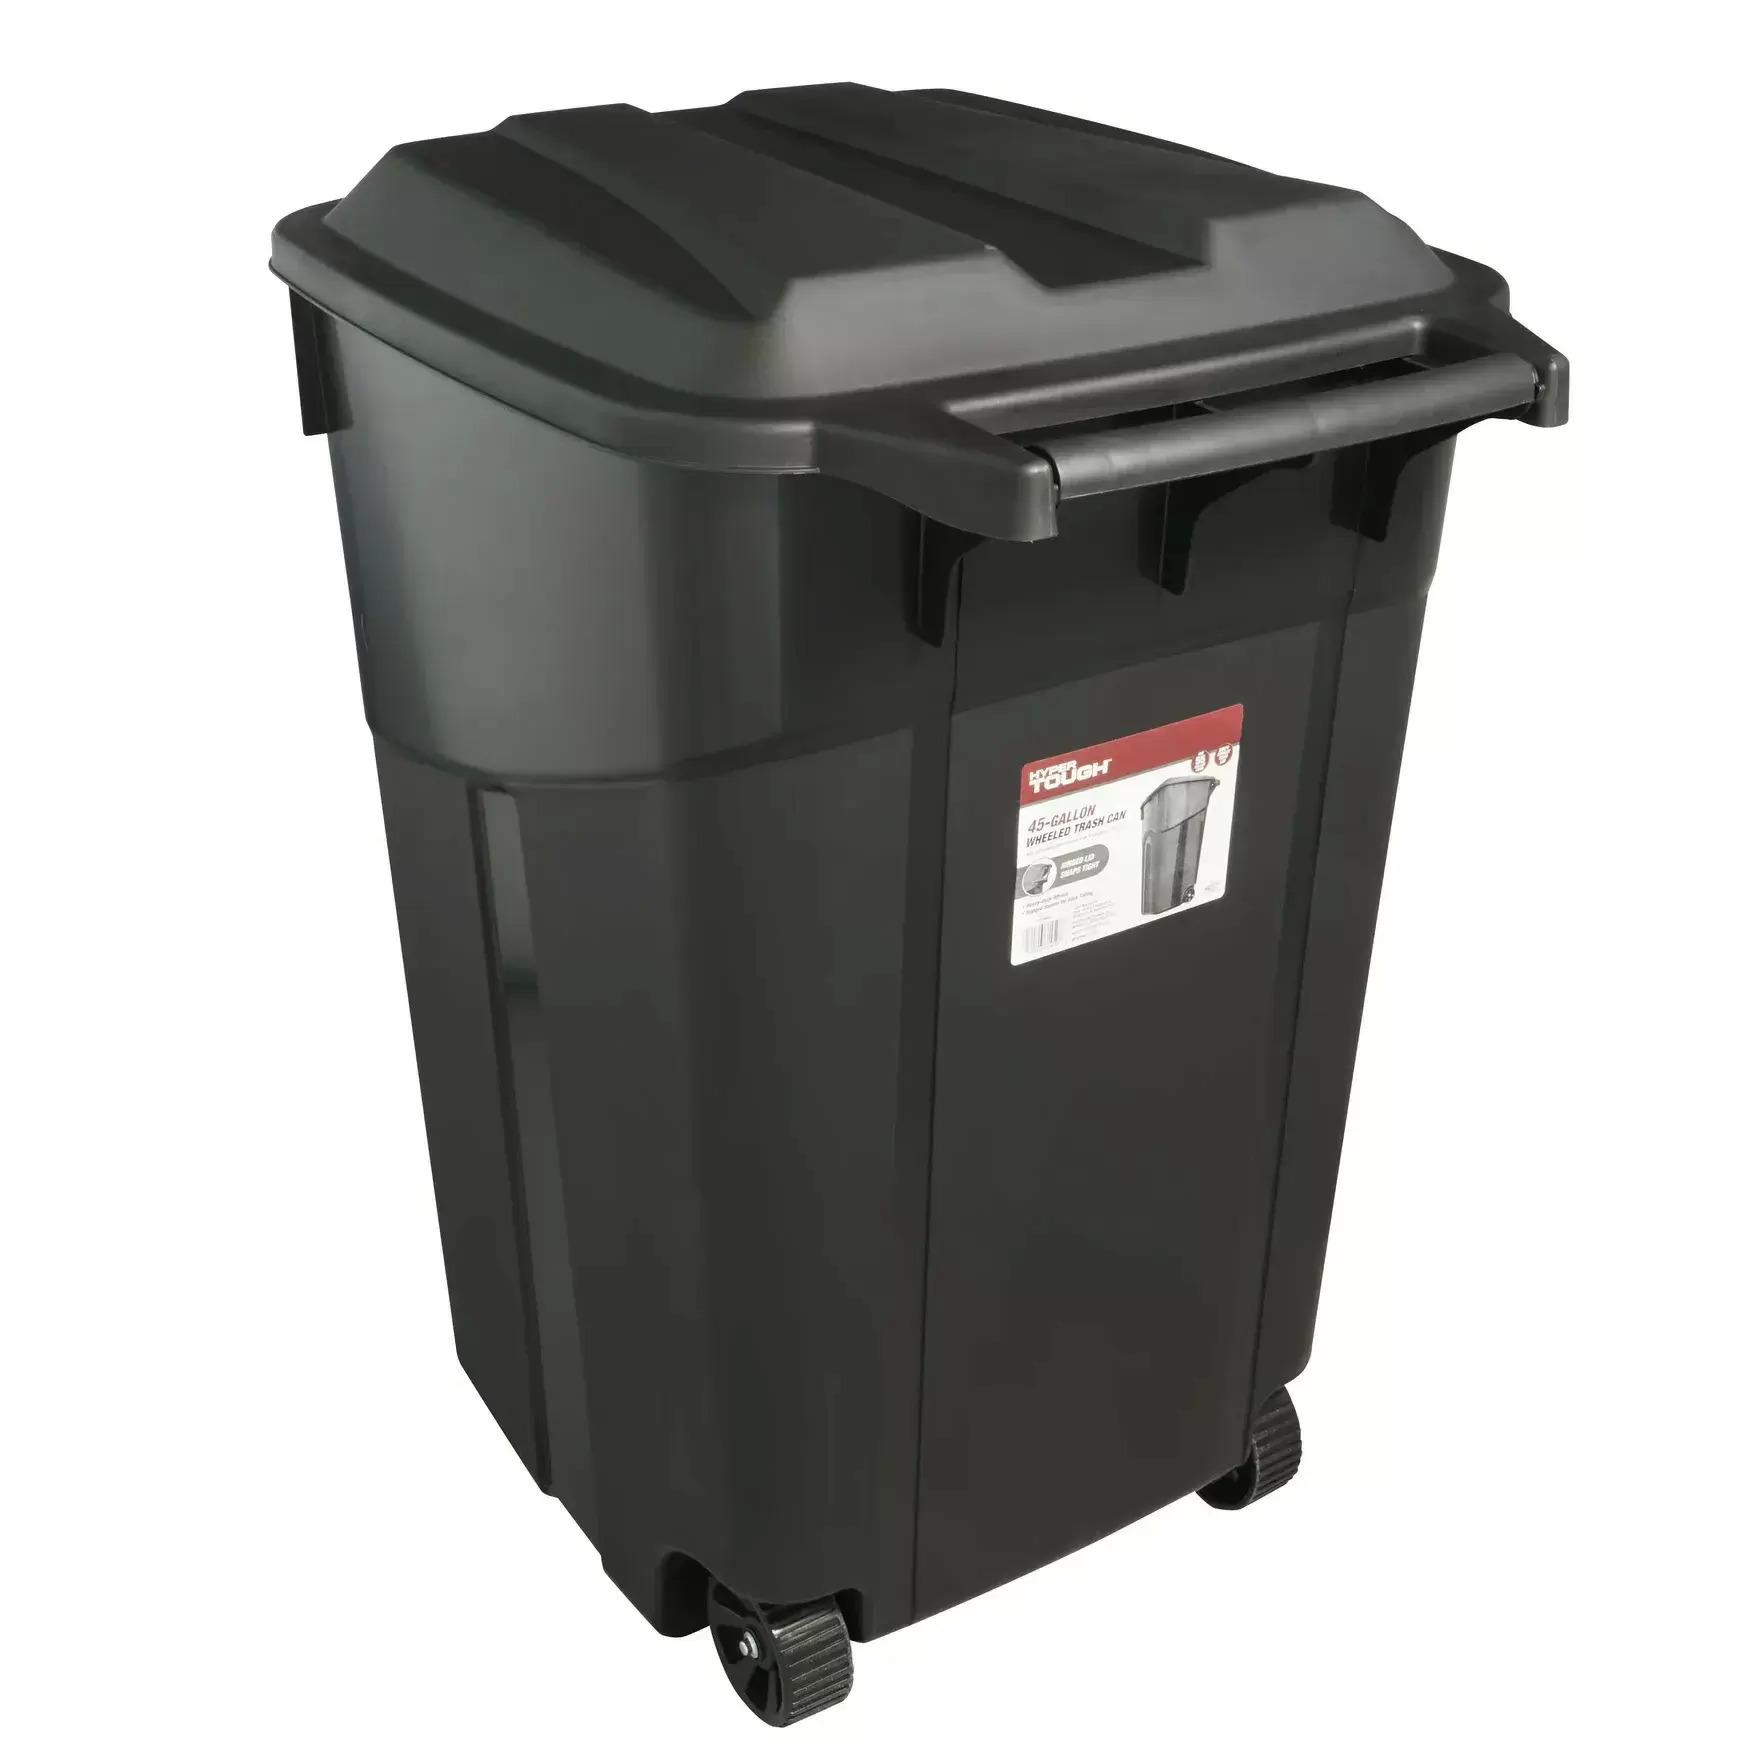 Hyper Tough 45 Gallon Wheeled Heavy Duty Plastic Garbage Can for $29.96